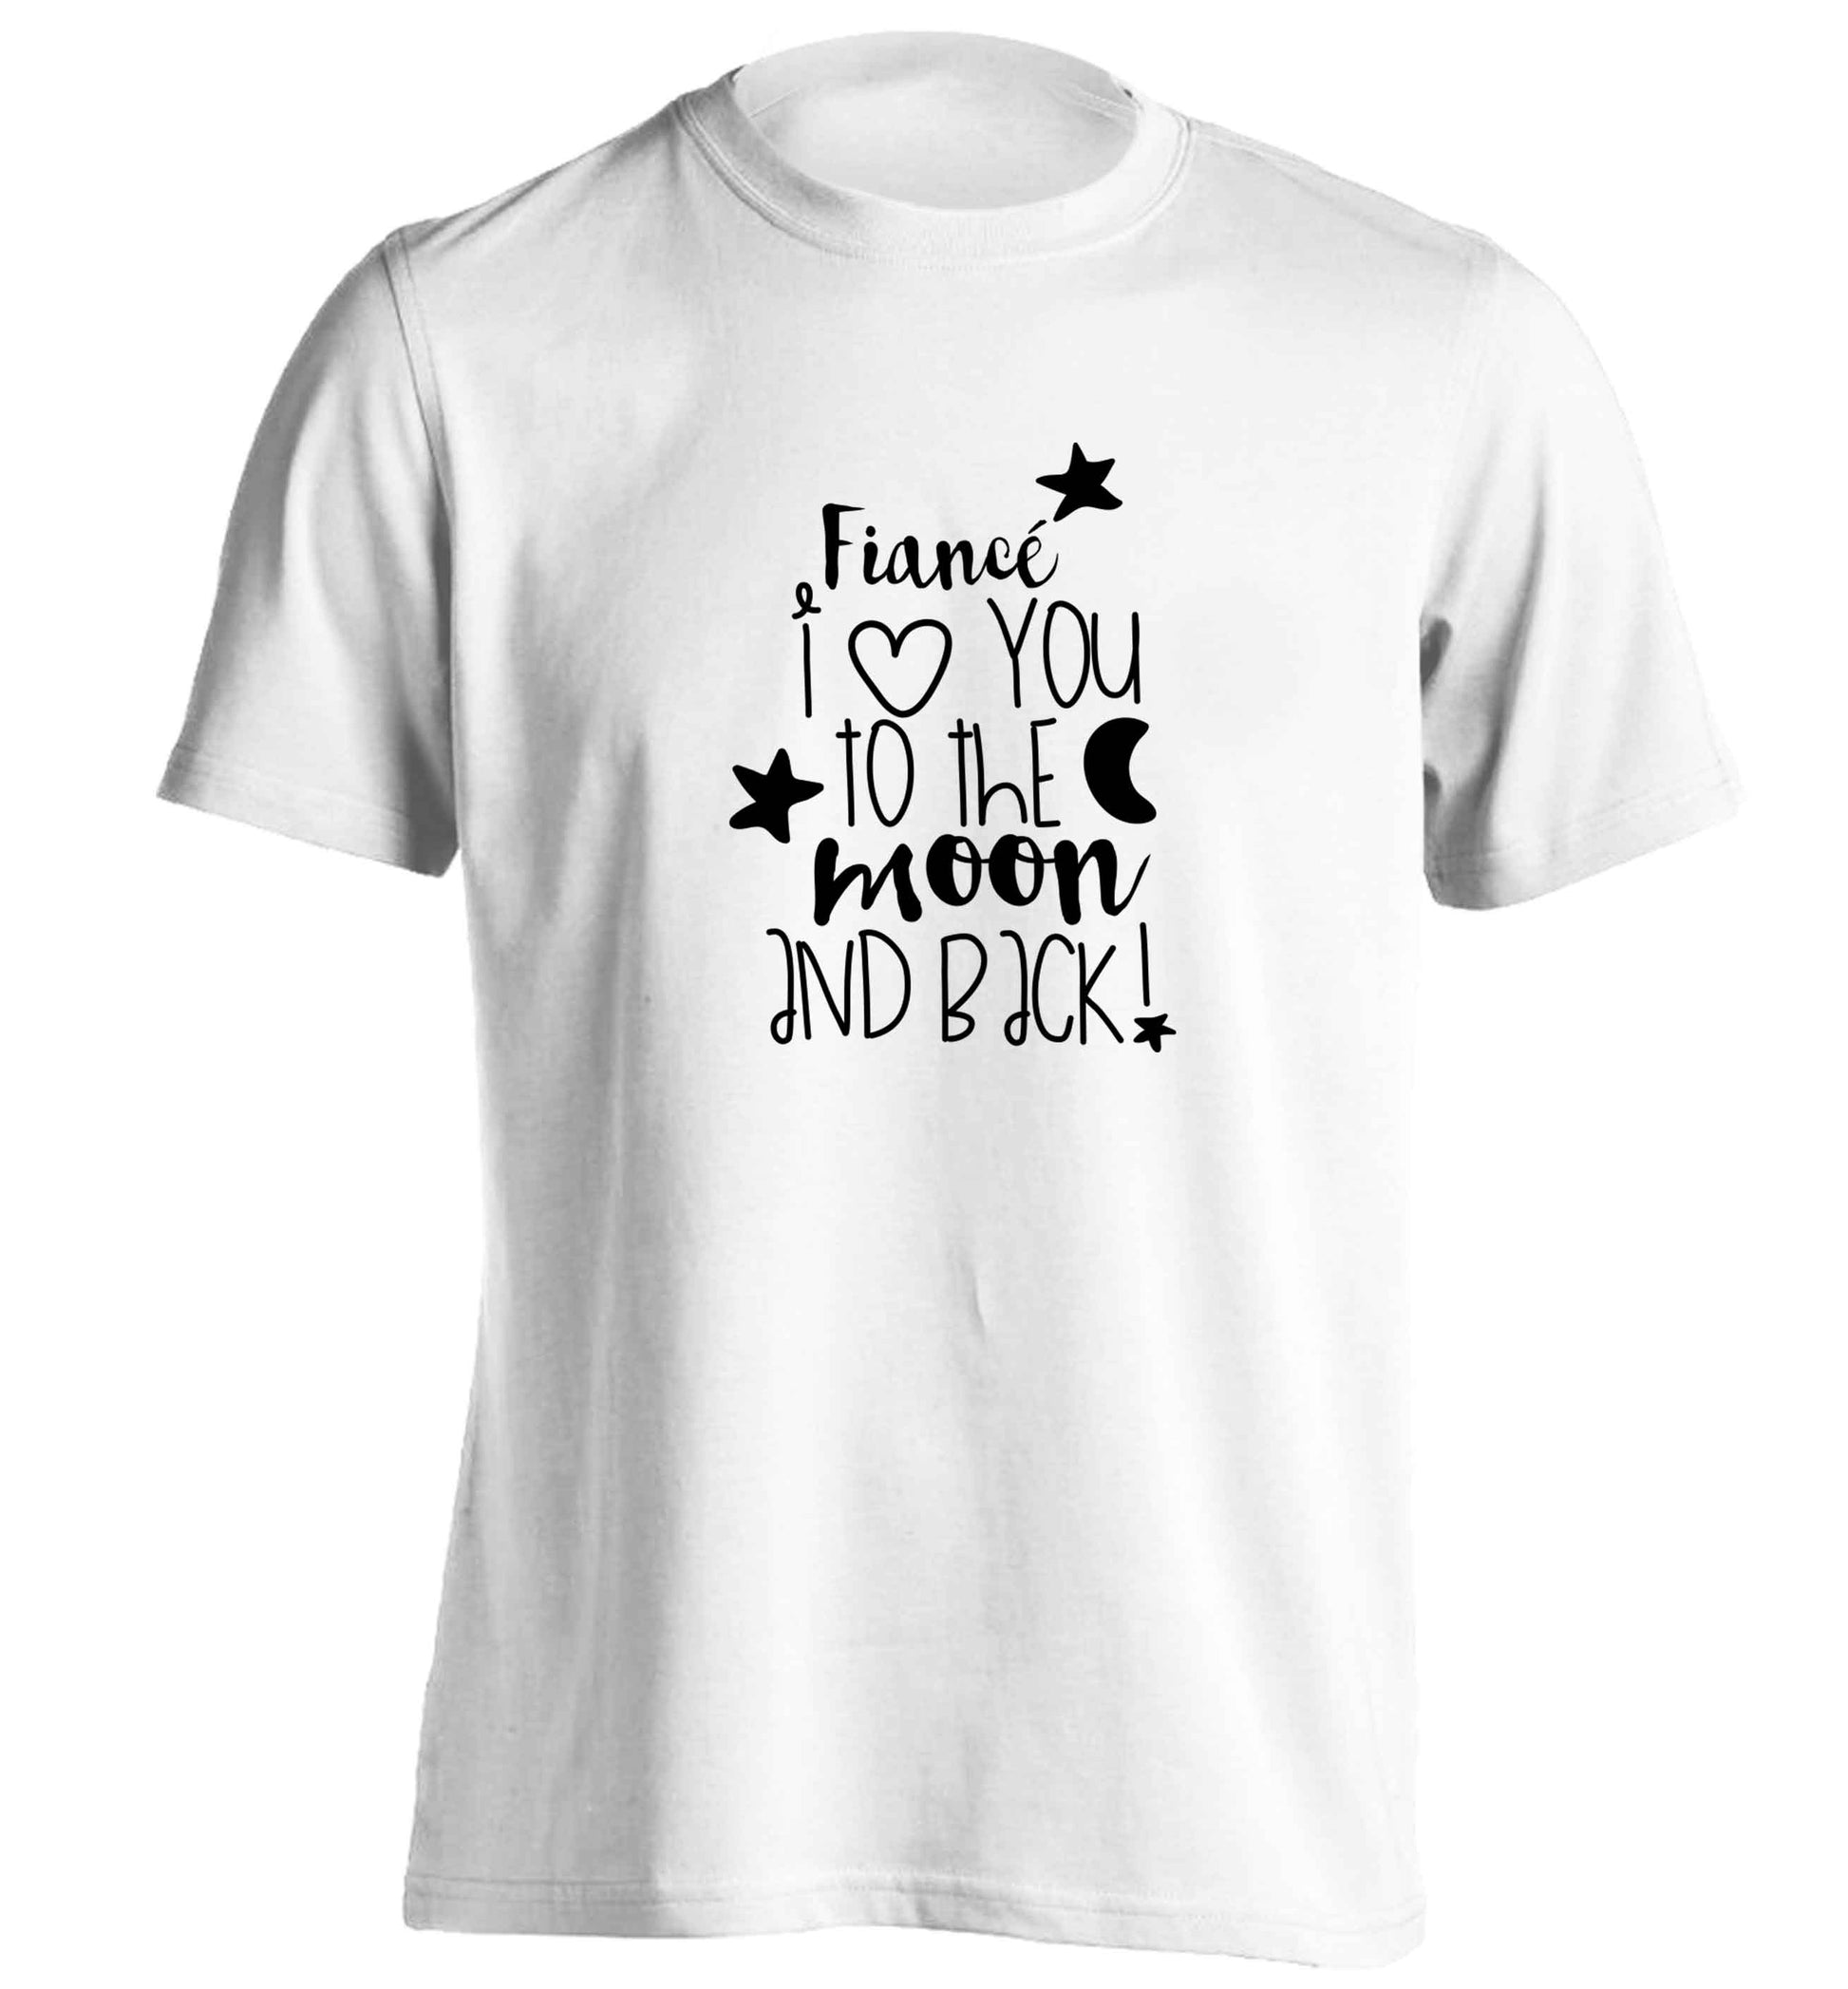 Fianc√© I love you to the moon and back adults unisex white Tshirt 2XL